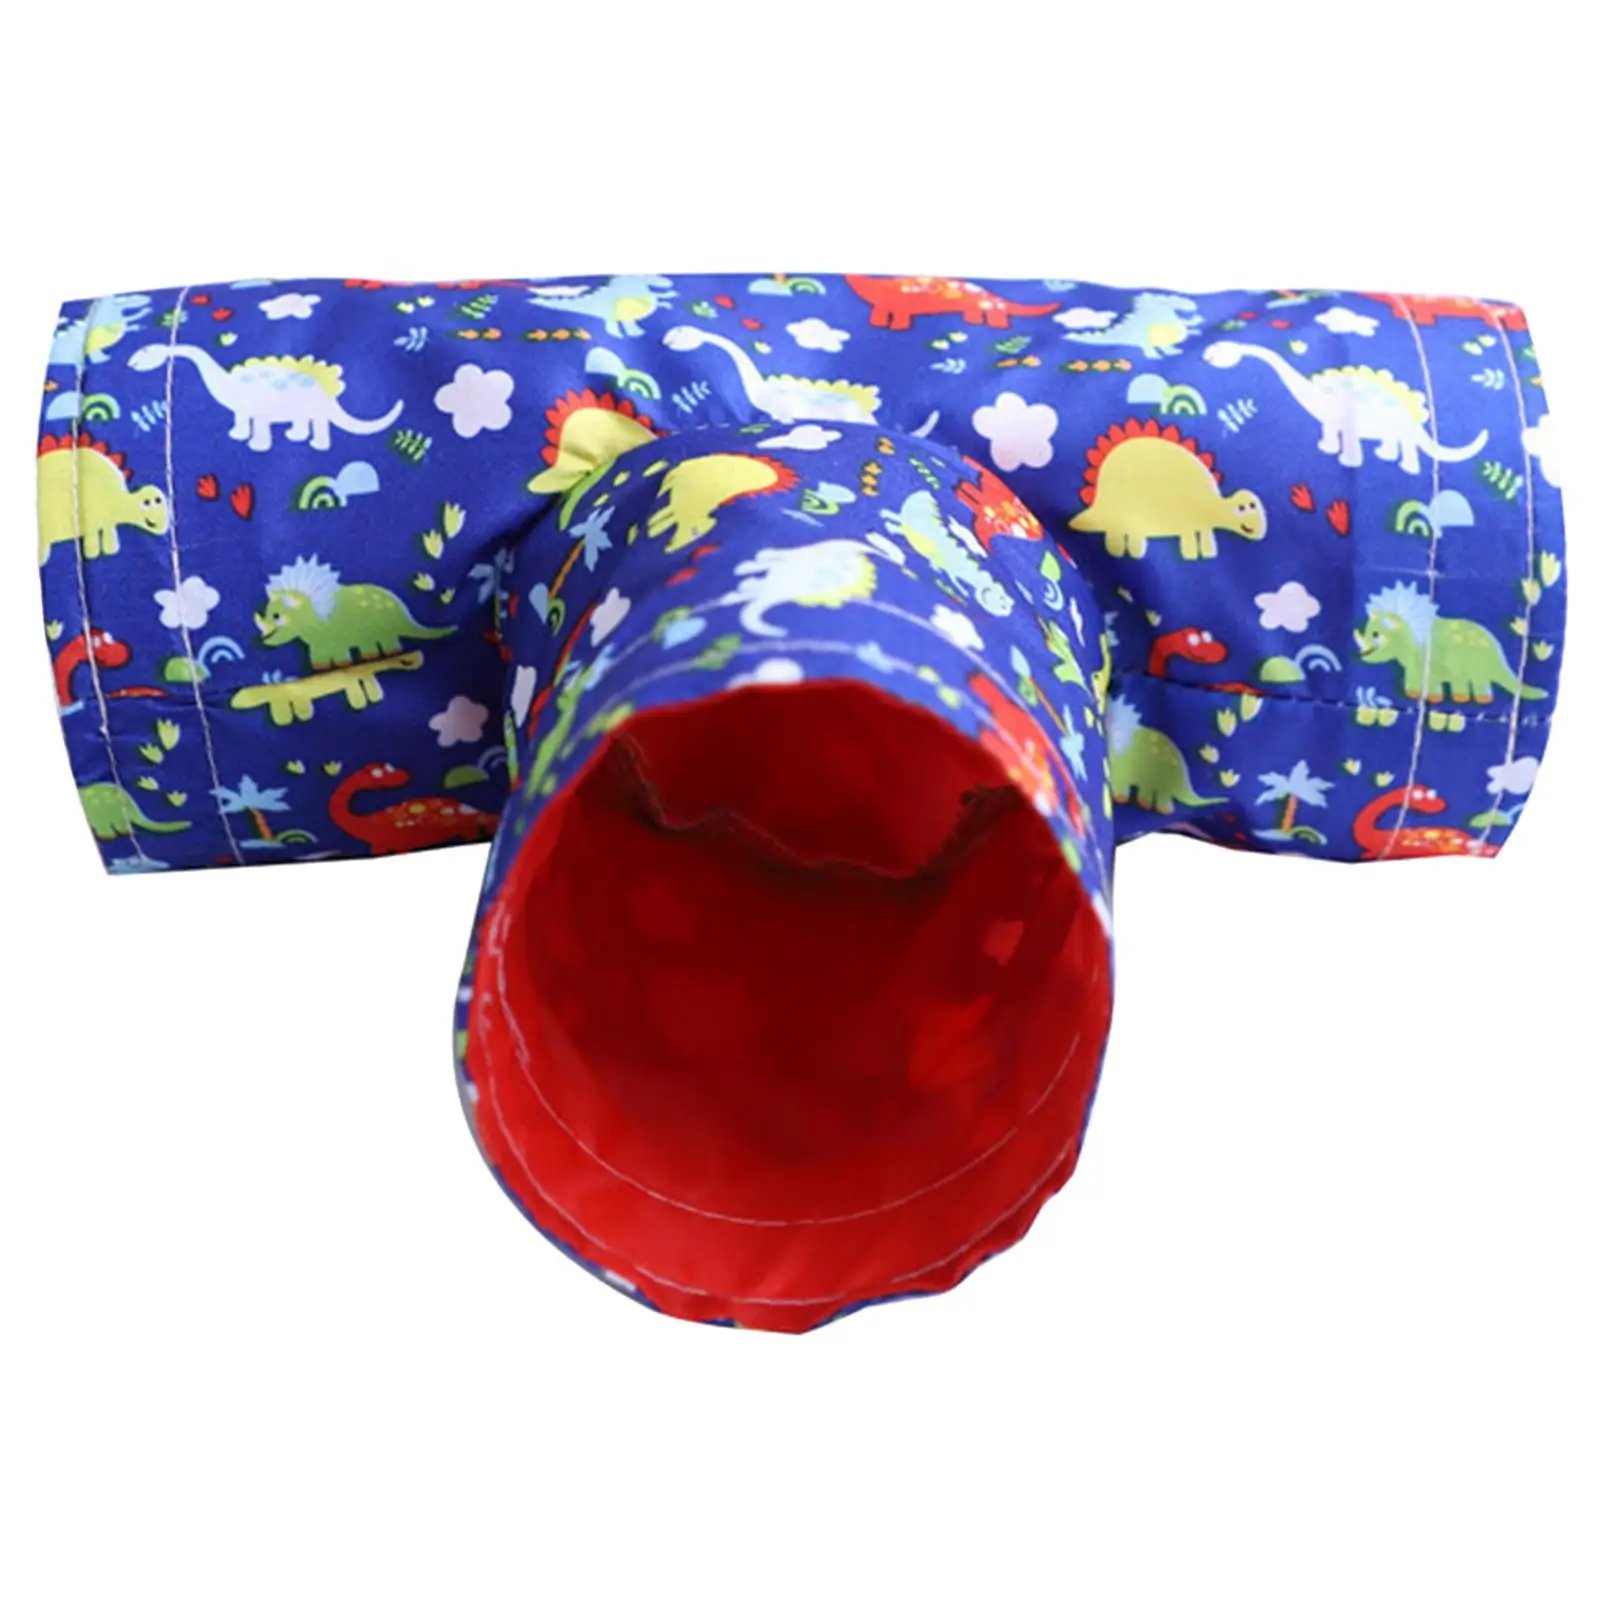 Small Animal Guinea Pig Tunnels Hideaway Play Toy for Dwarf Rabbit Hamster